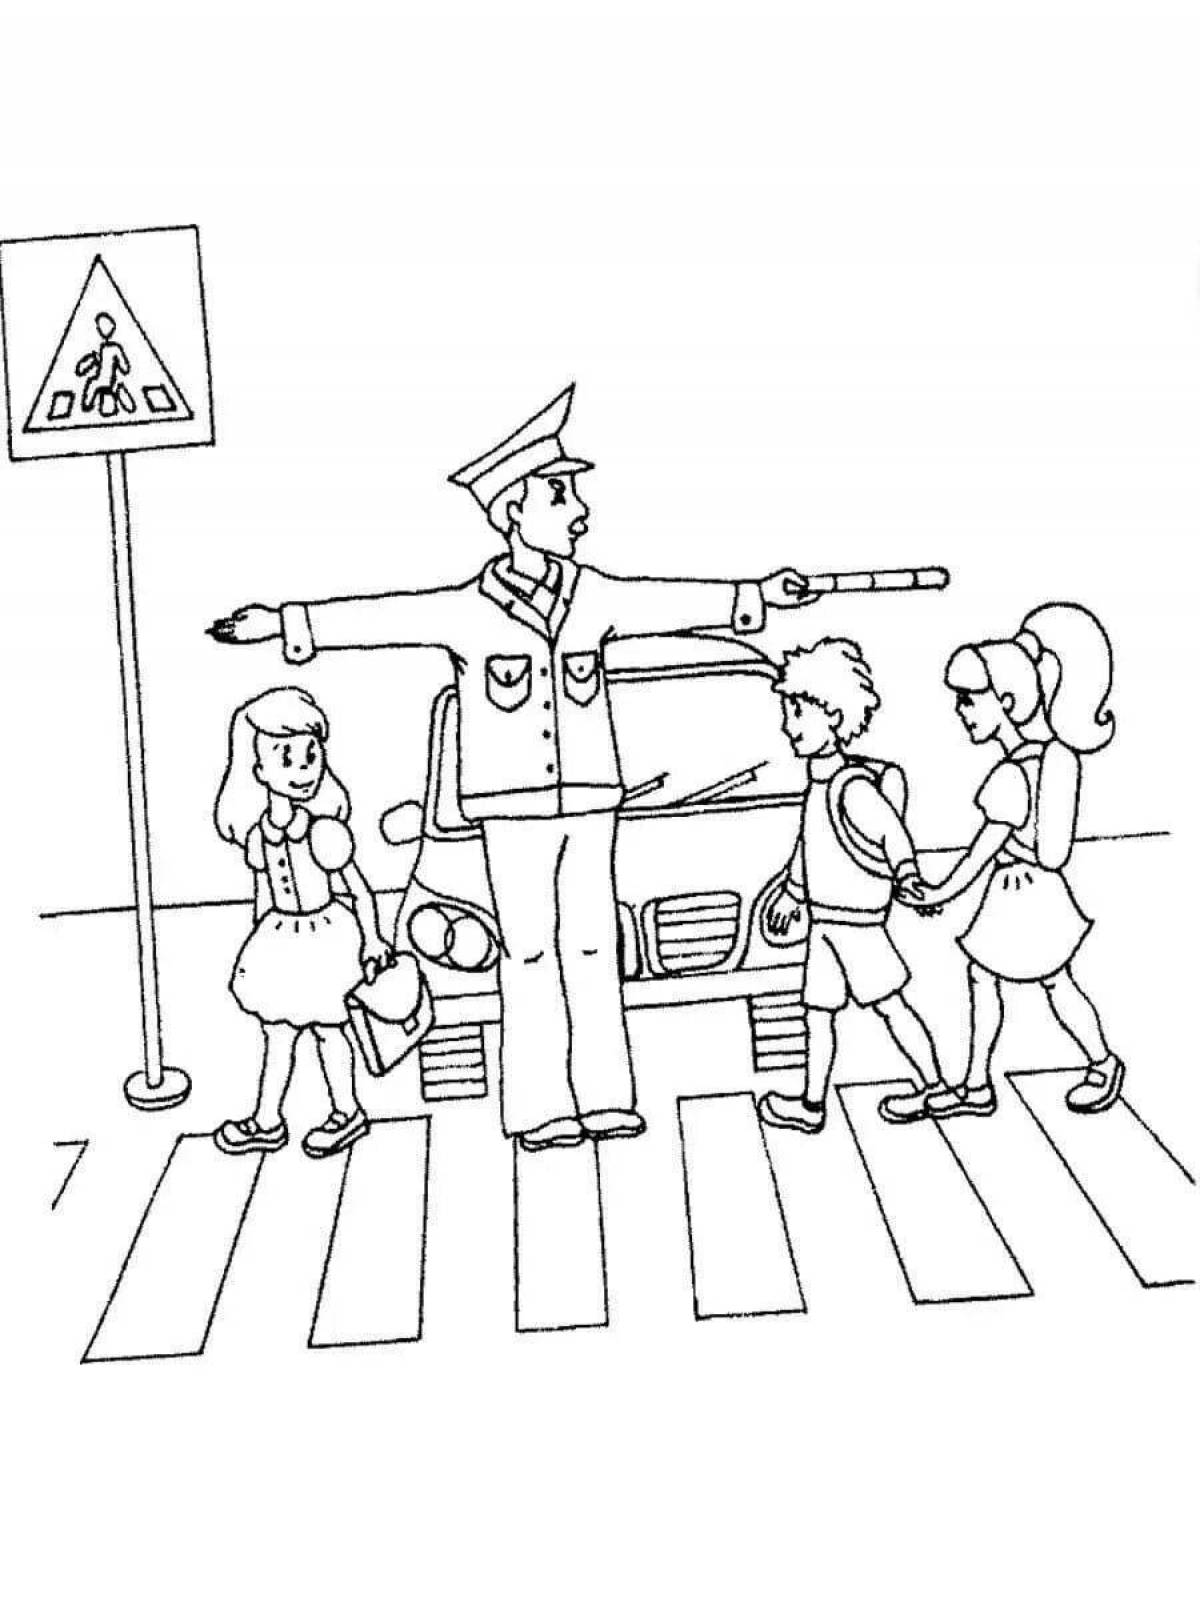 Colorful traffic rules for schoolchildren